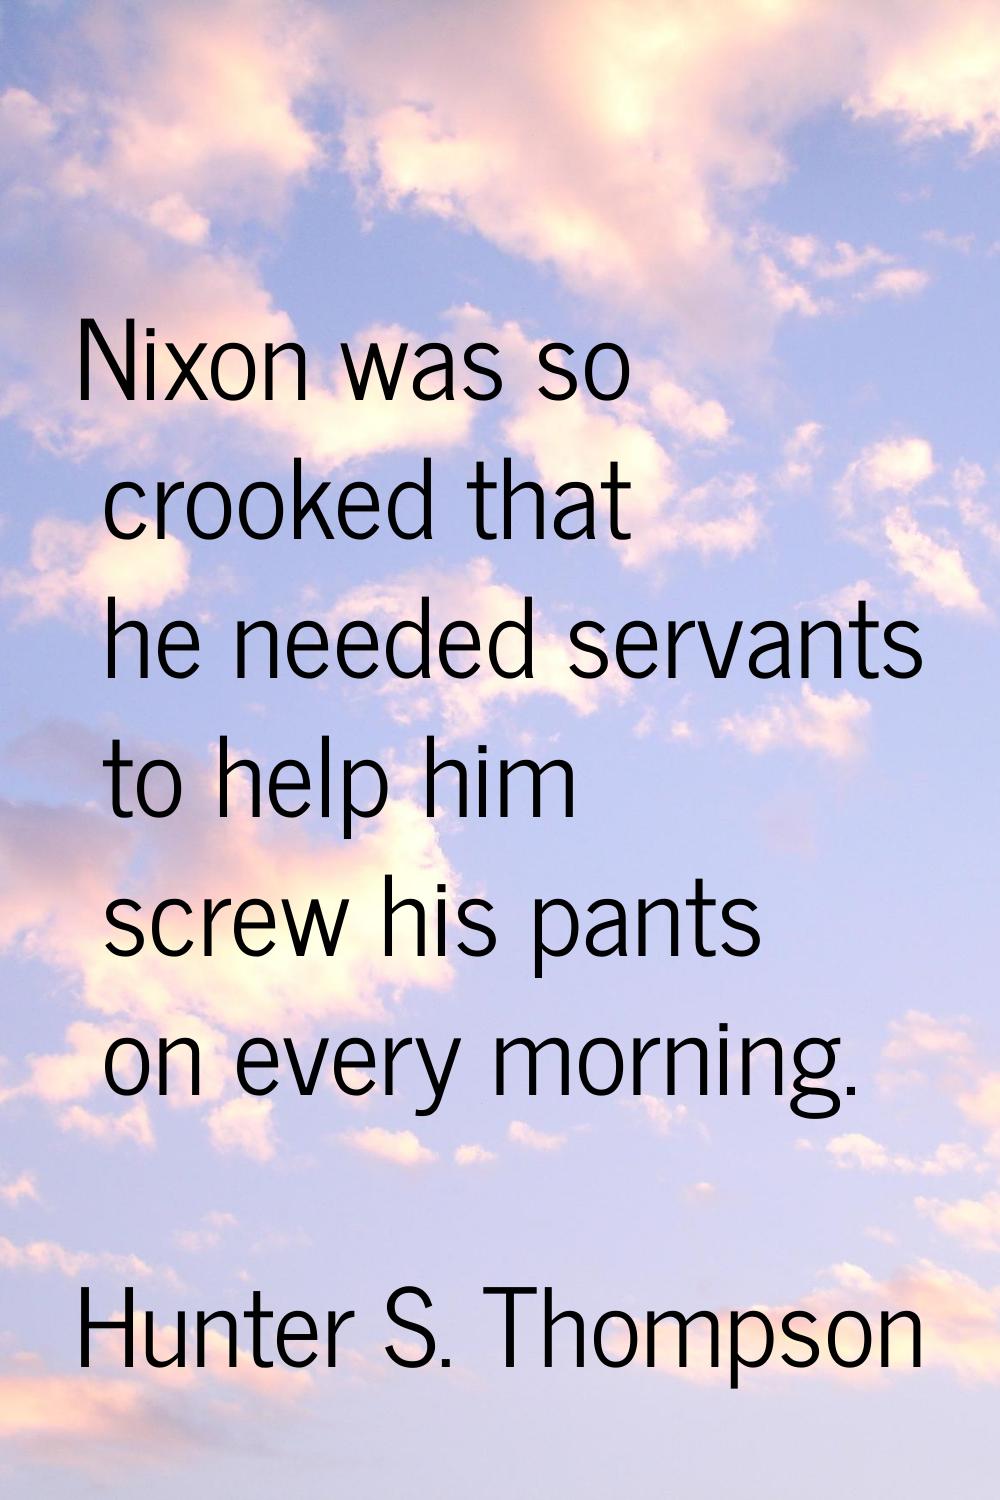 Nixon was so crooked that he needed servants to help him screw his pants on every morning.